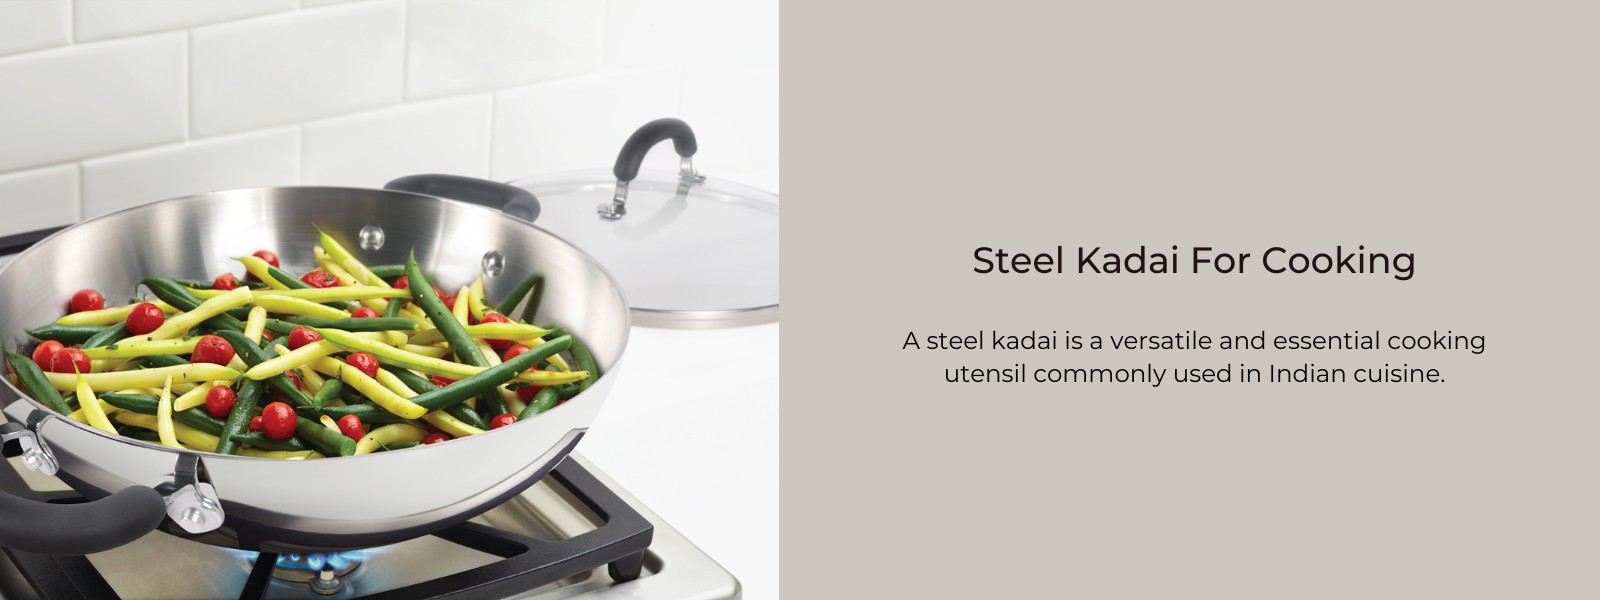 Kadai is one of the most used cookware in the Indian kitchen, By